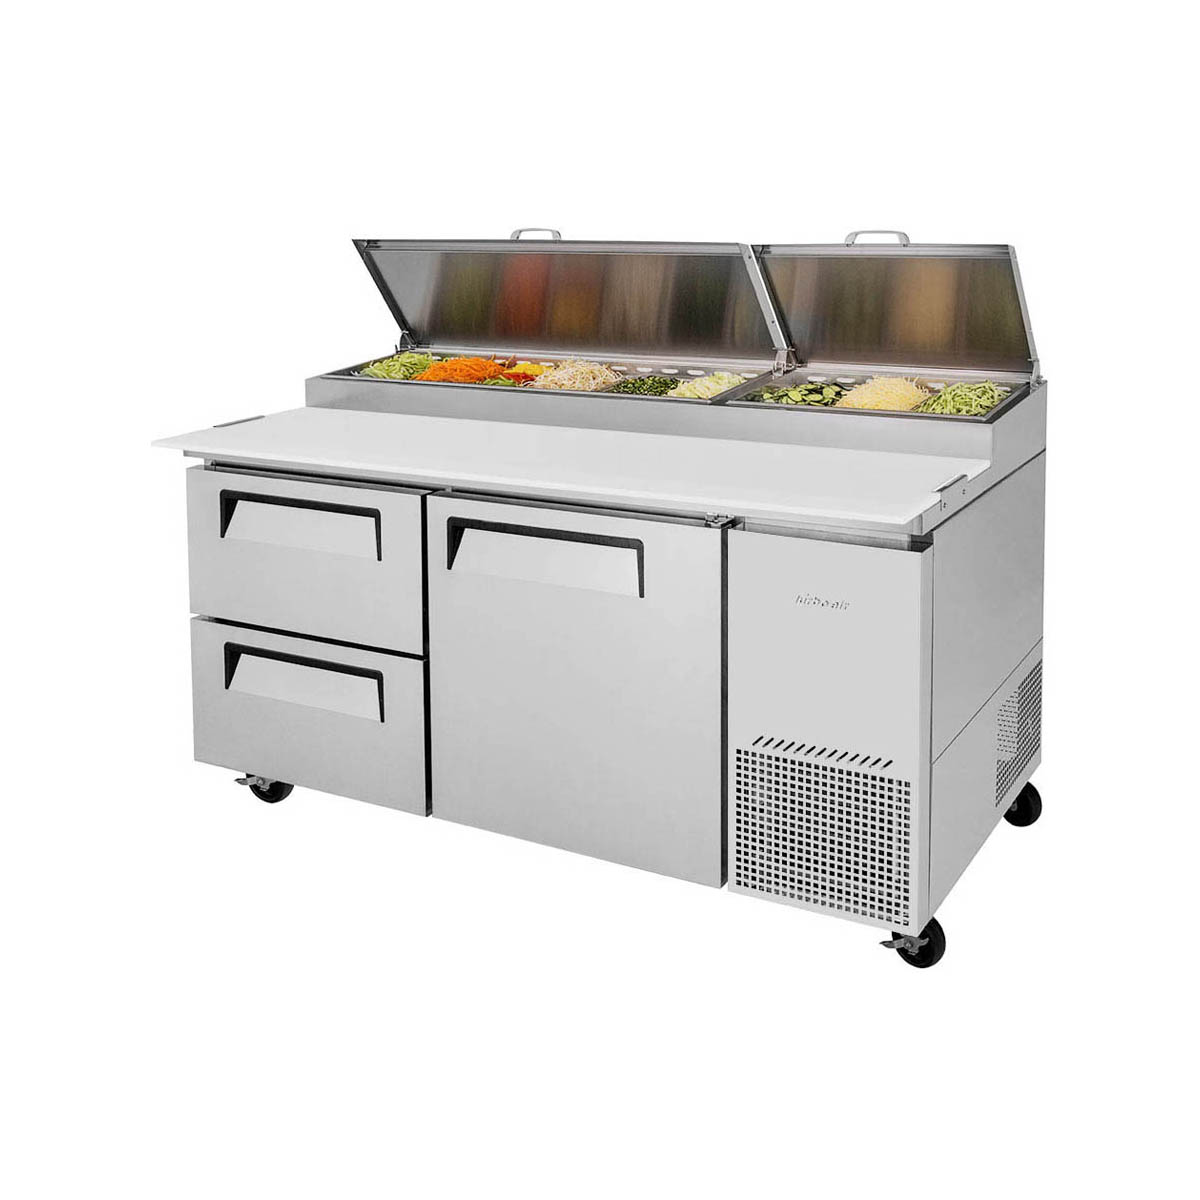 Turbo Air TPR-67SD-D2-N 67″ Two Section Refrigerated Pizza Prep Table, 20.0 cu. ft.